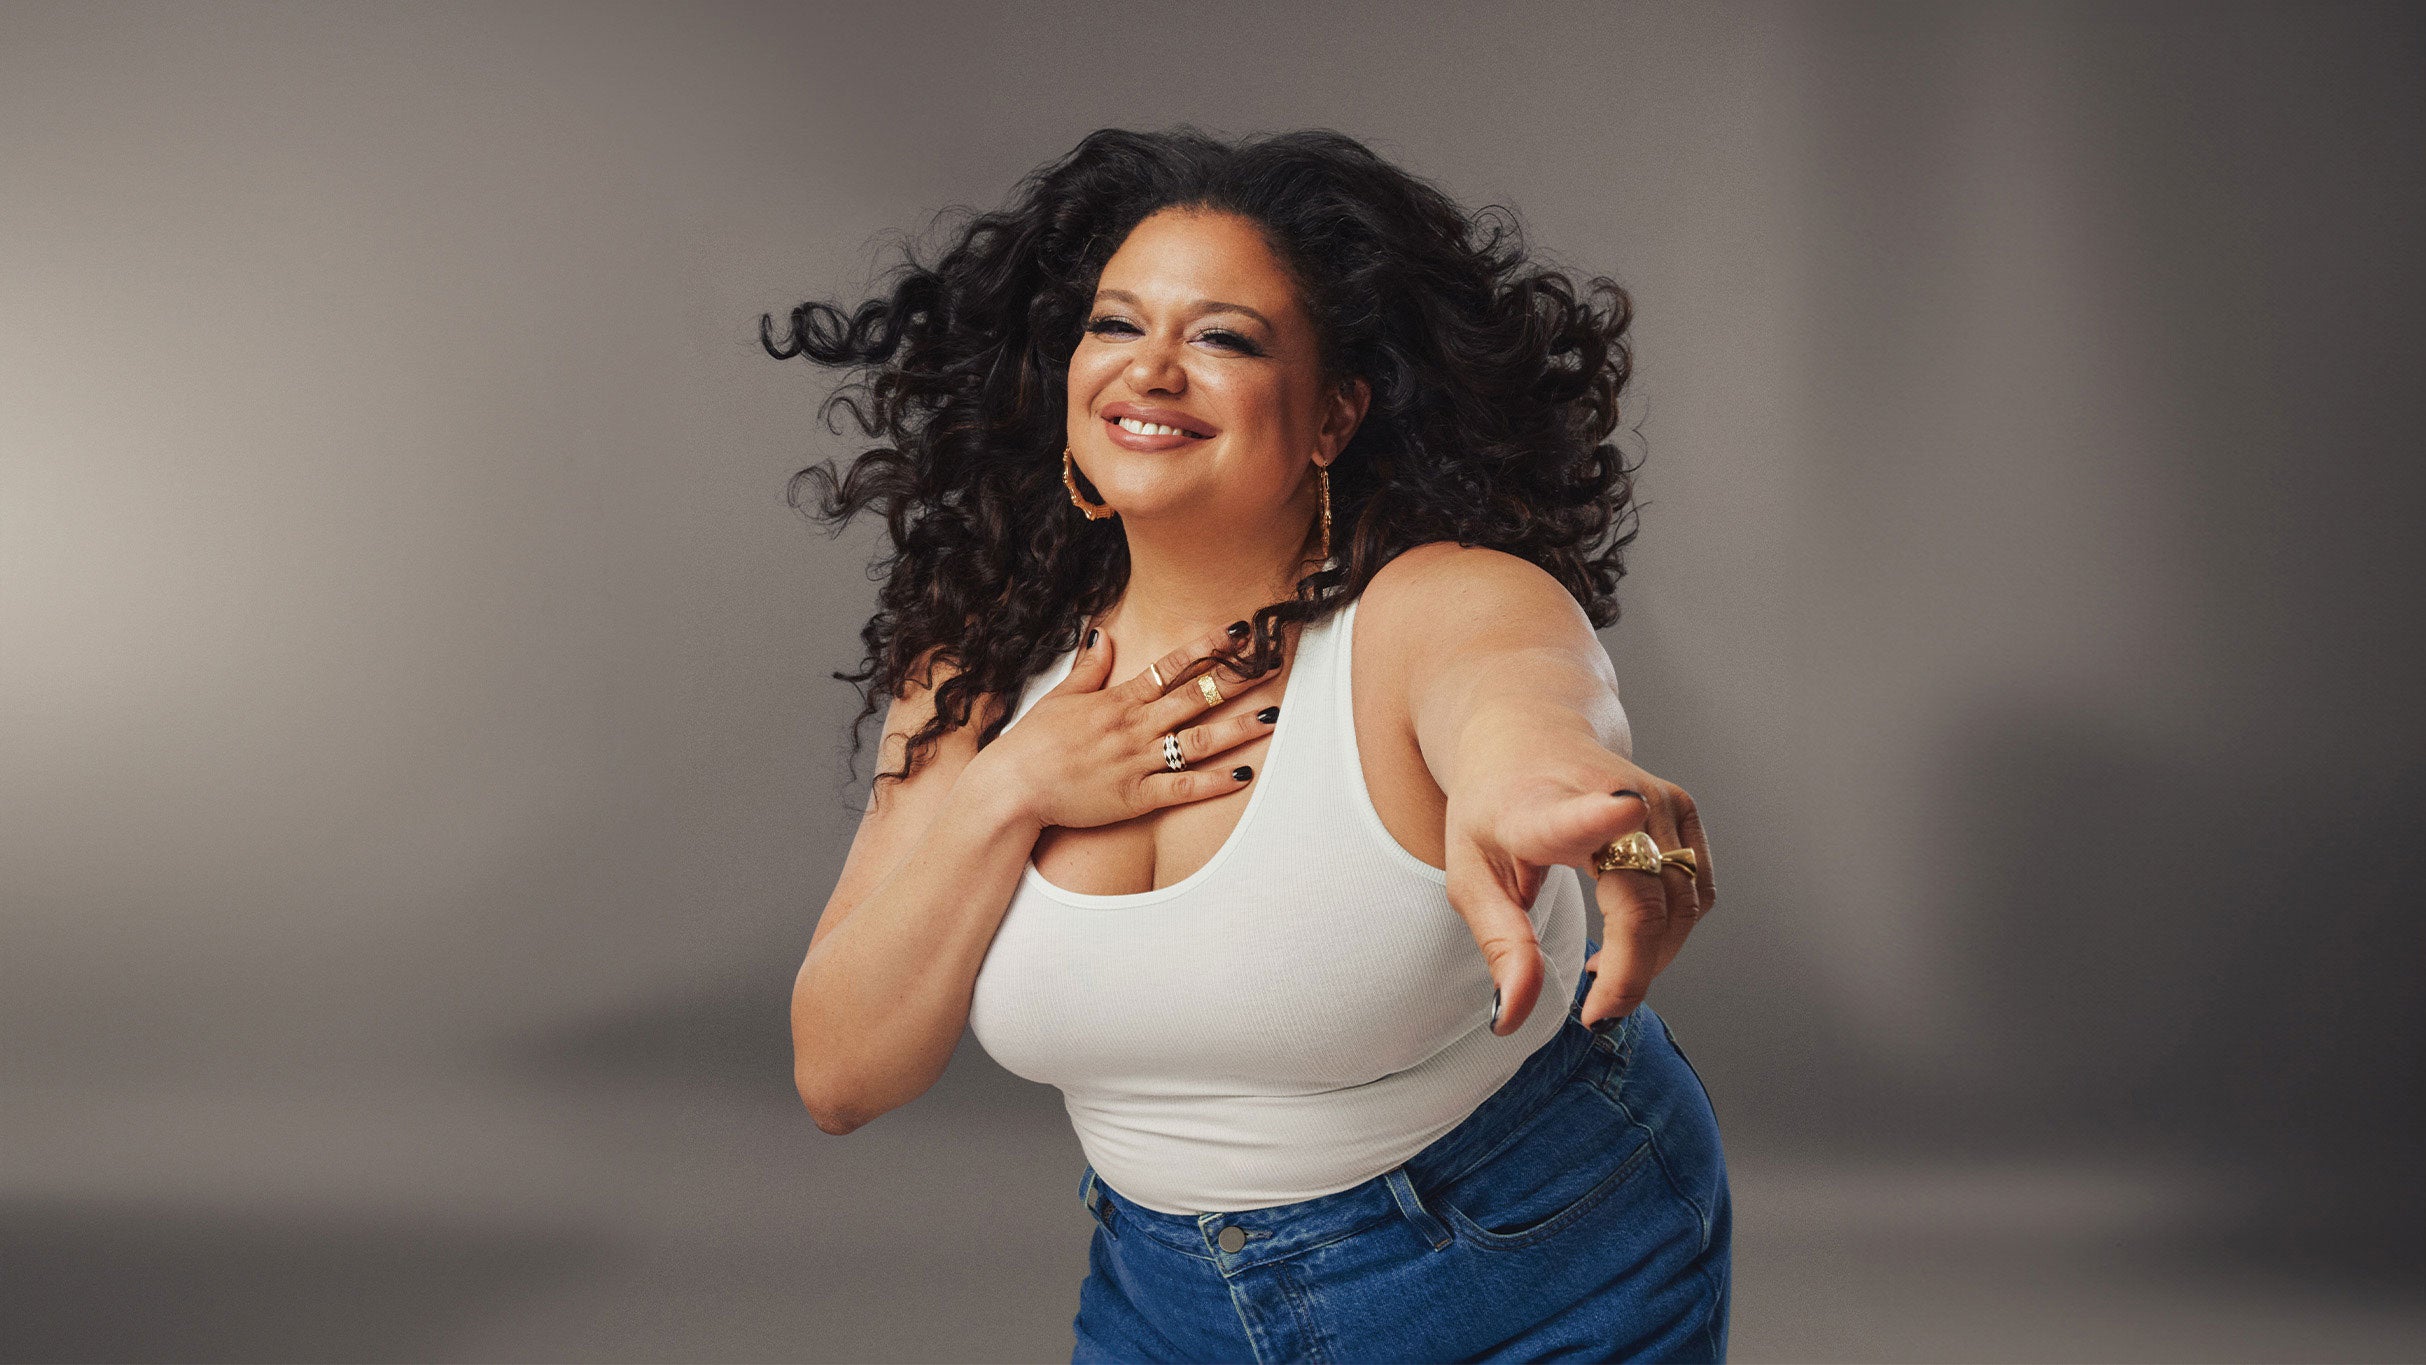 Michelle Buteau: Full Heart, Tight Jeans Tour free pre-sale password for early tickets in Medford